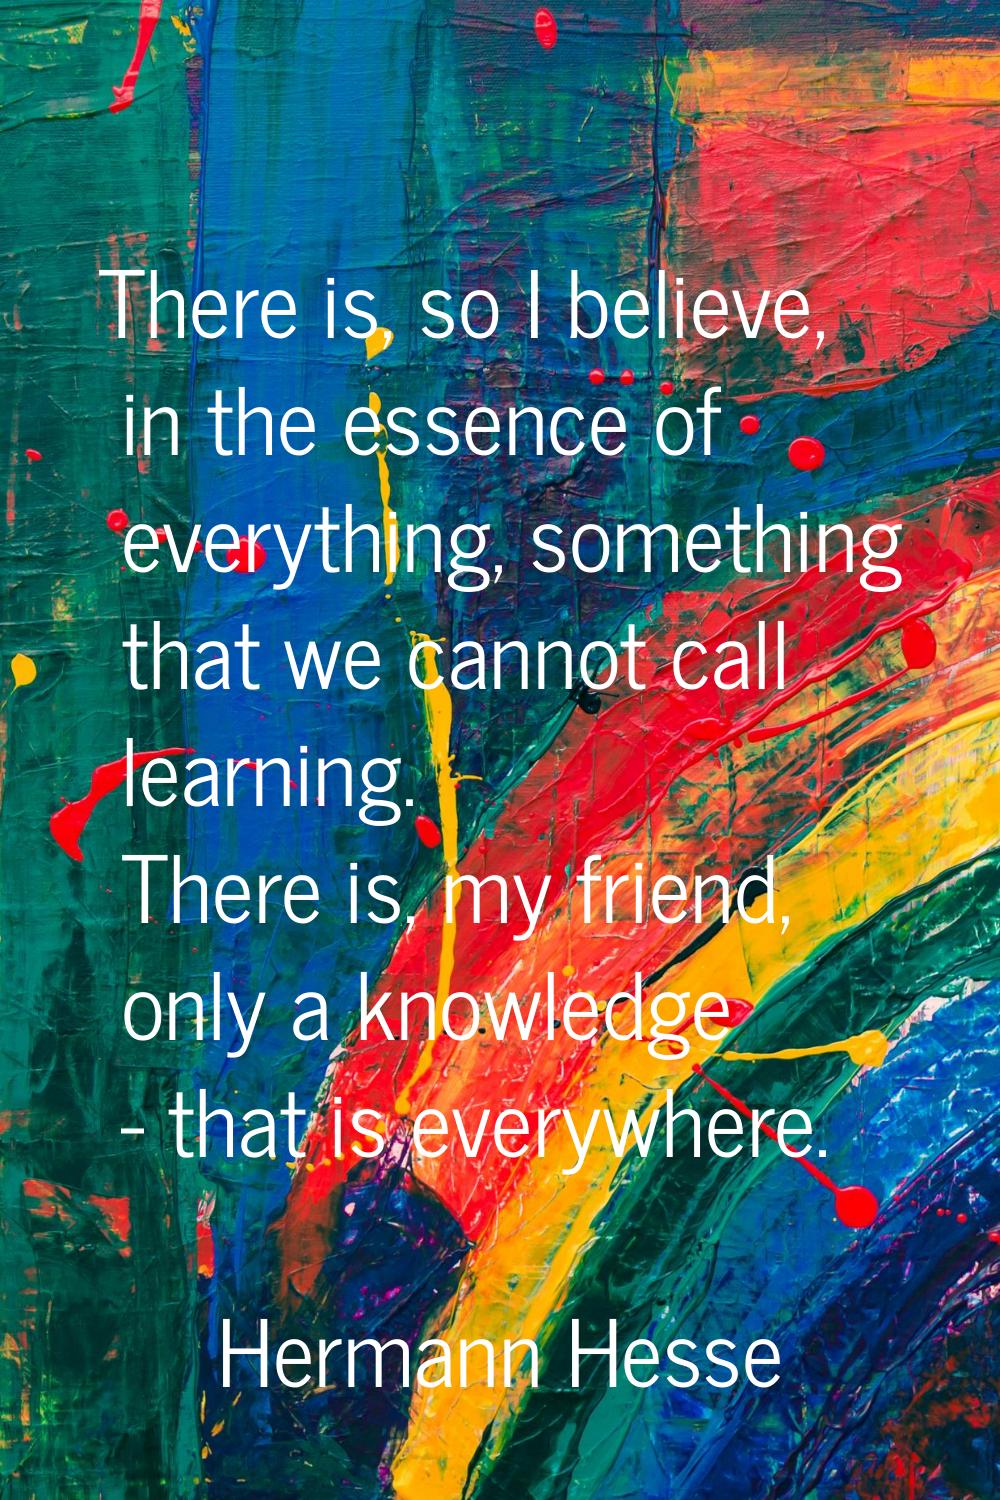 There is, so I believe, in the essence of everything, something that we cannot call learning. There